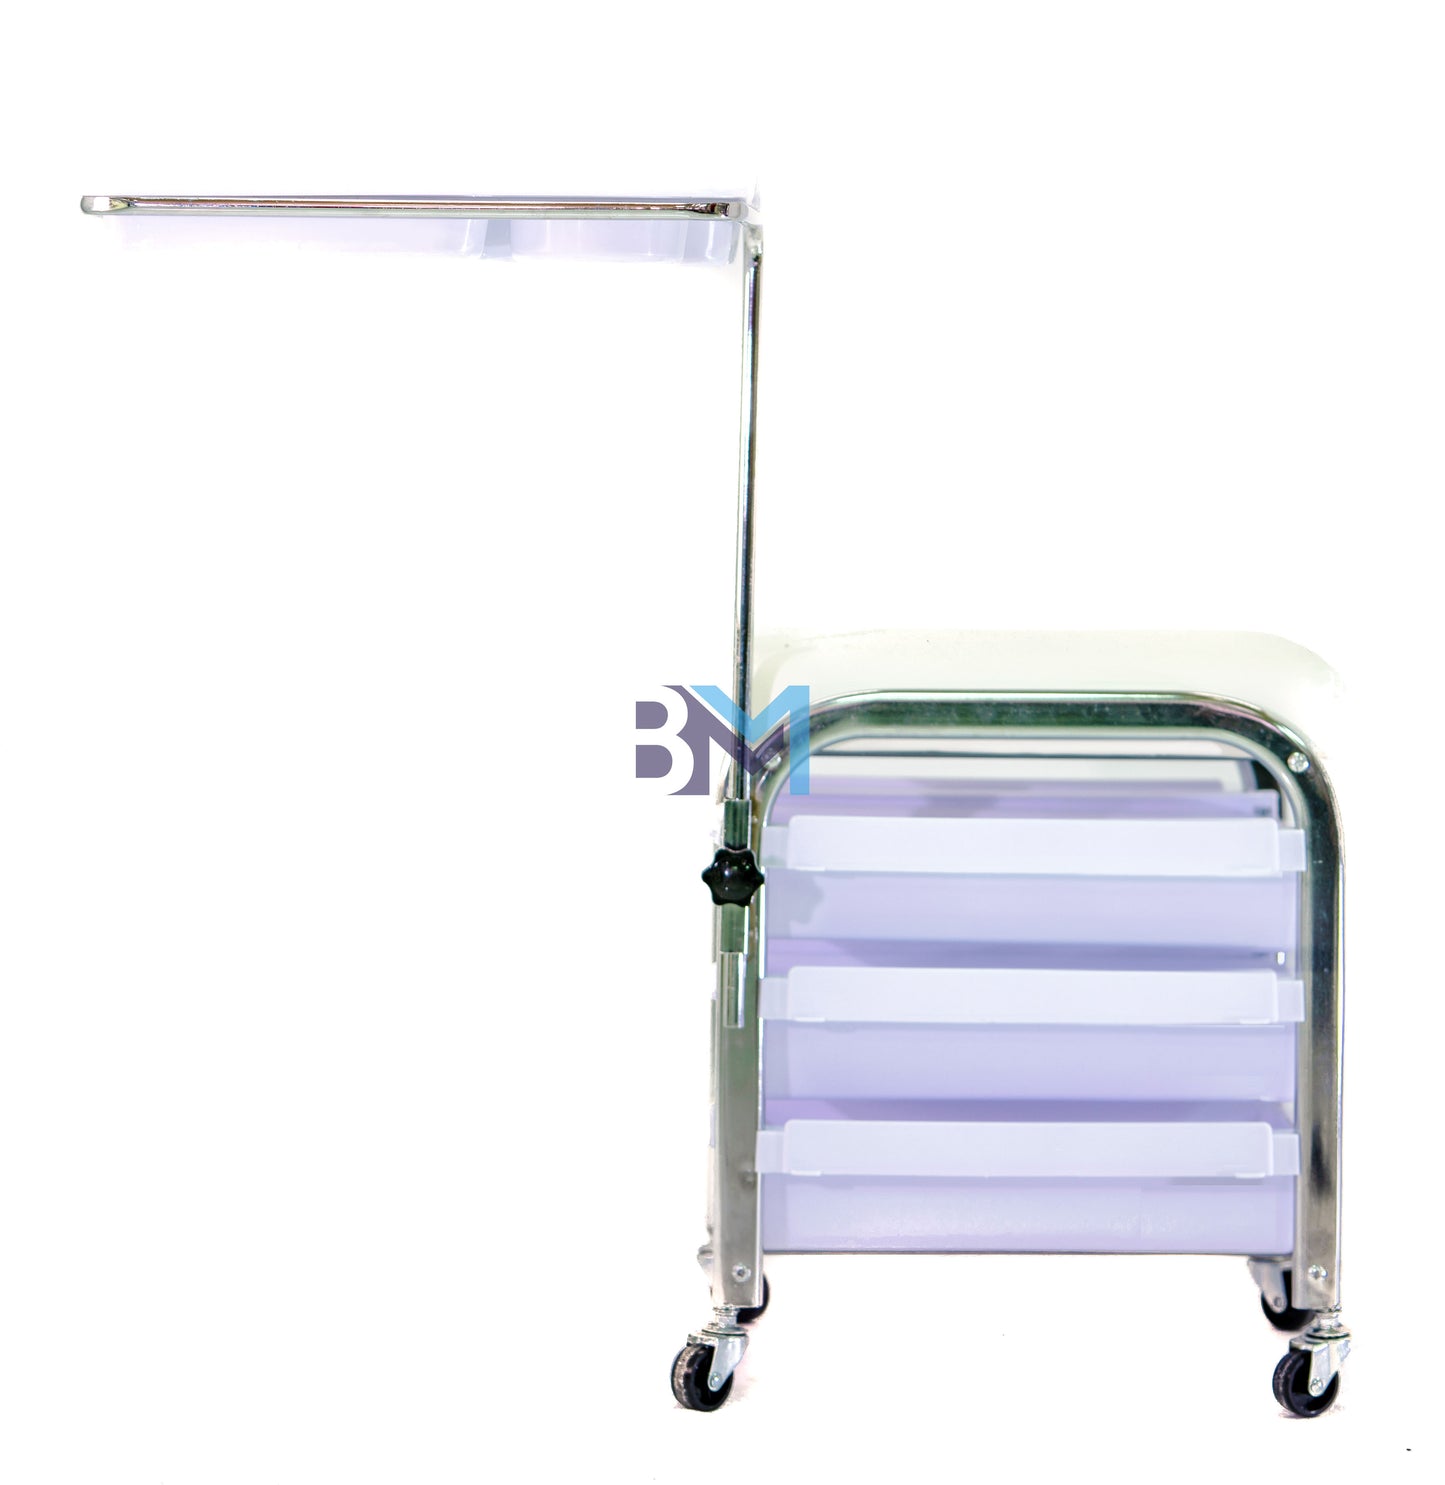 AUXILIARY CART WITH SEAT